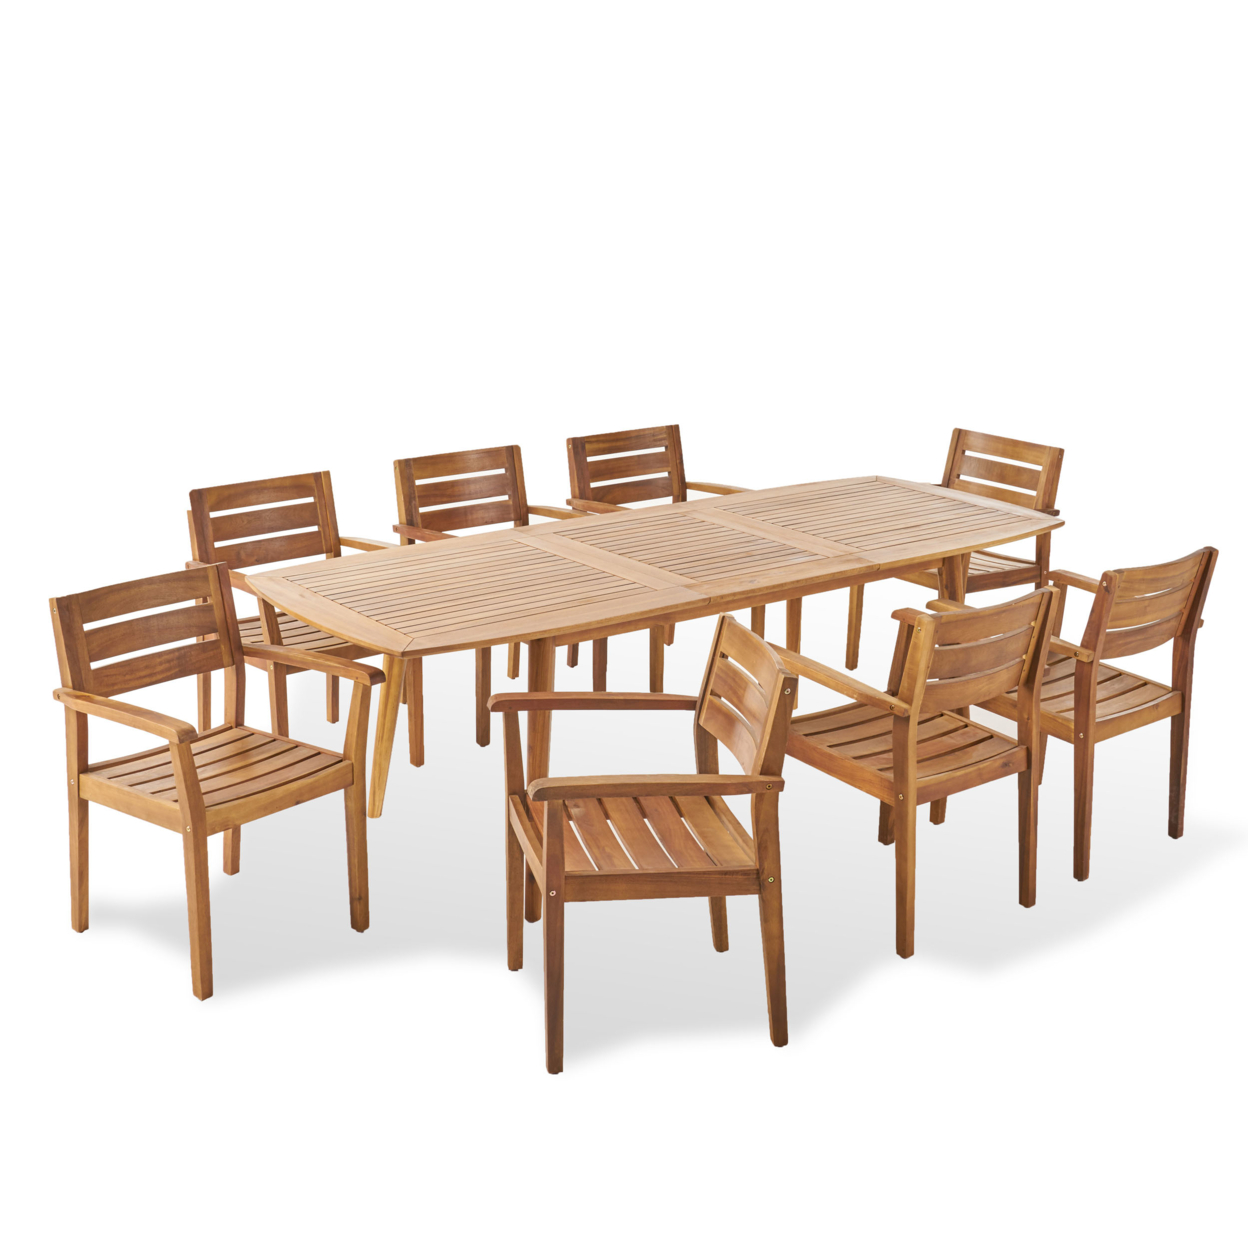 Stanford Outdoor Acacia Wood Expandable 8 Seater Dining Set - Teak